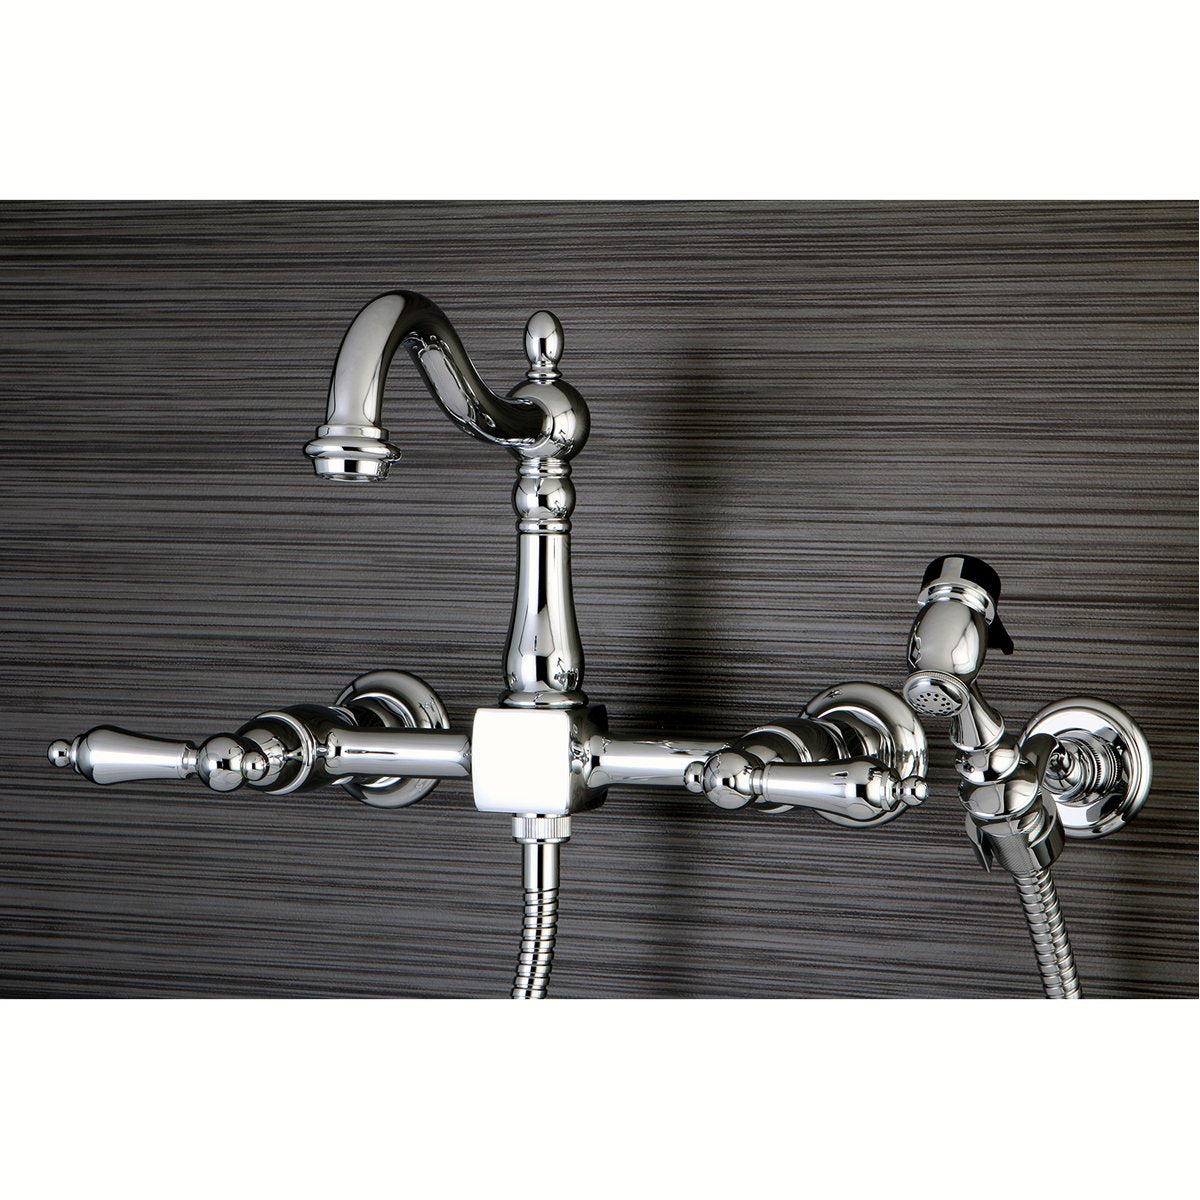 Kingston Brass Heritage 8-Inch Centerset Wall Mount Kitchen Faucet with Brass Sprayer